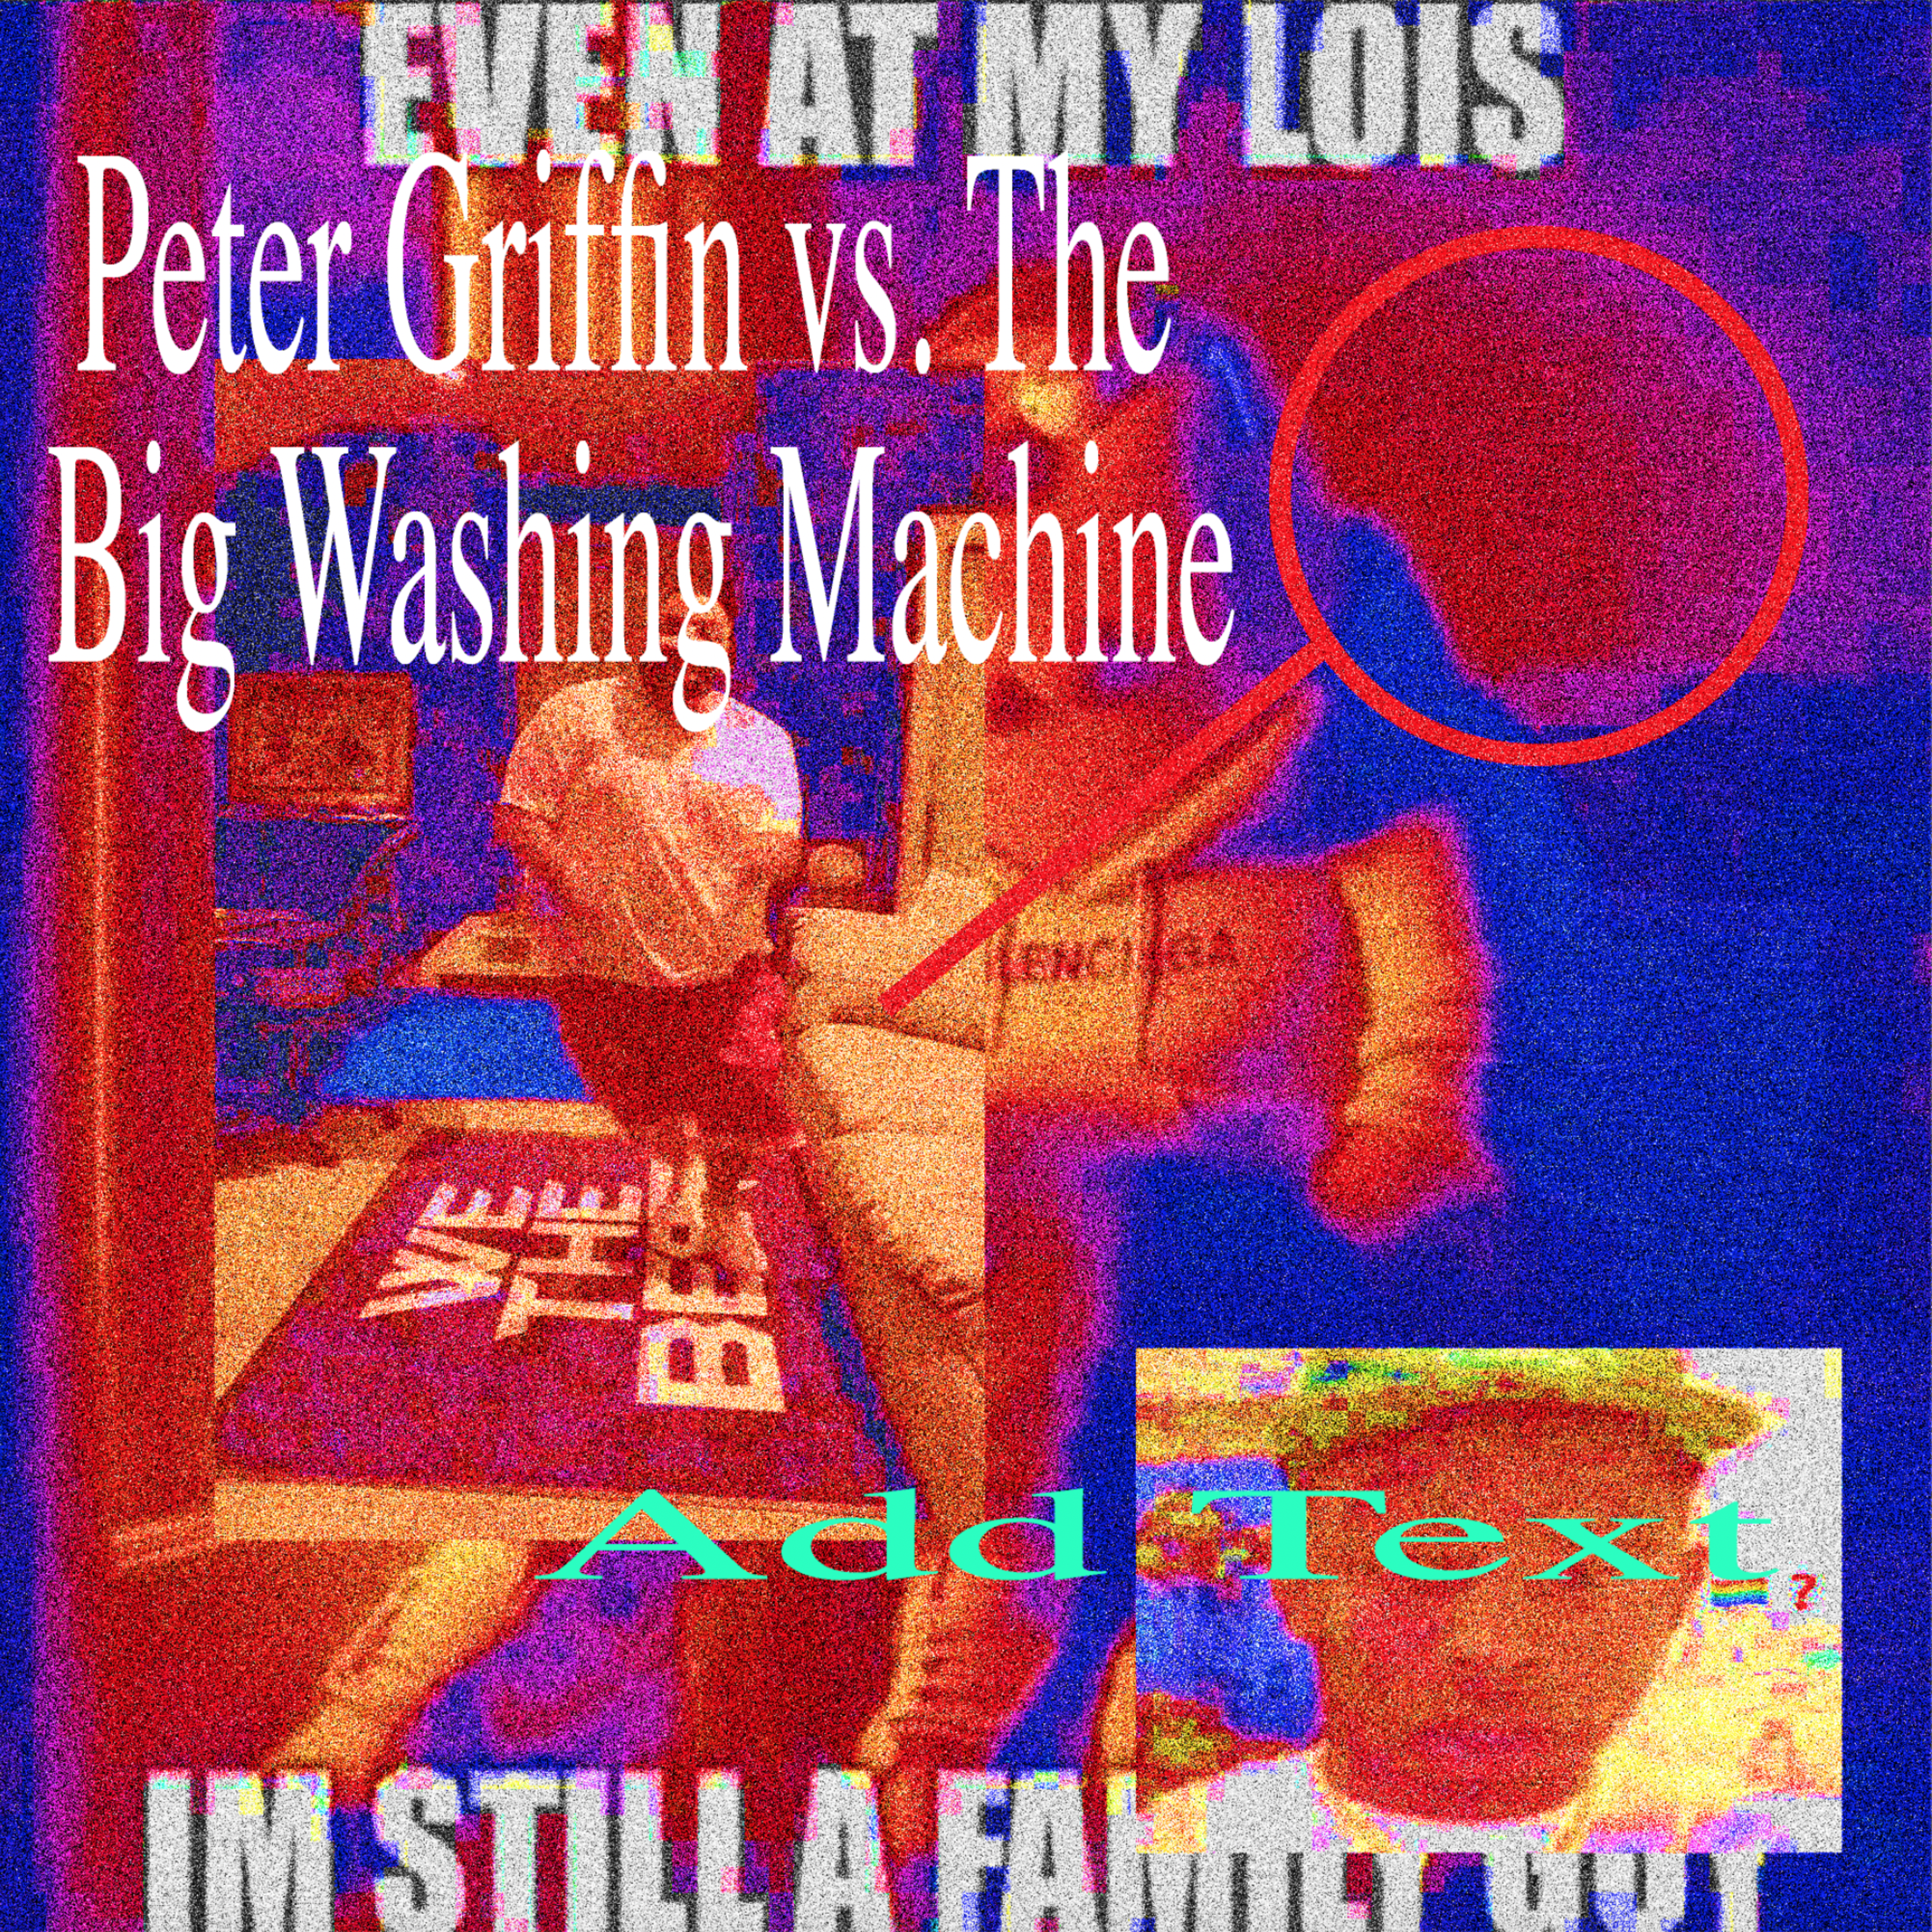 Peter Griffin vs. The Big Washing Machine